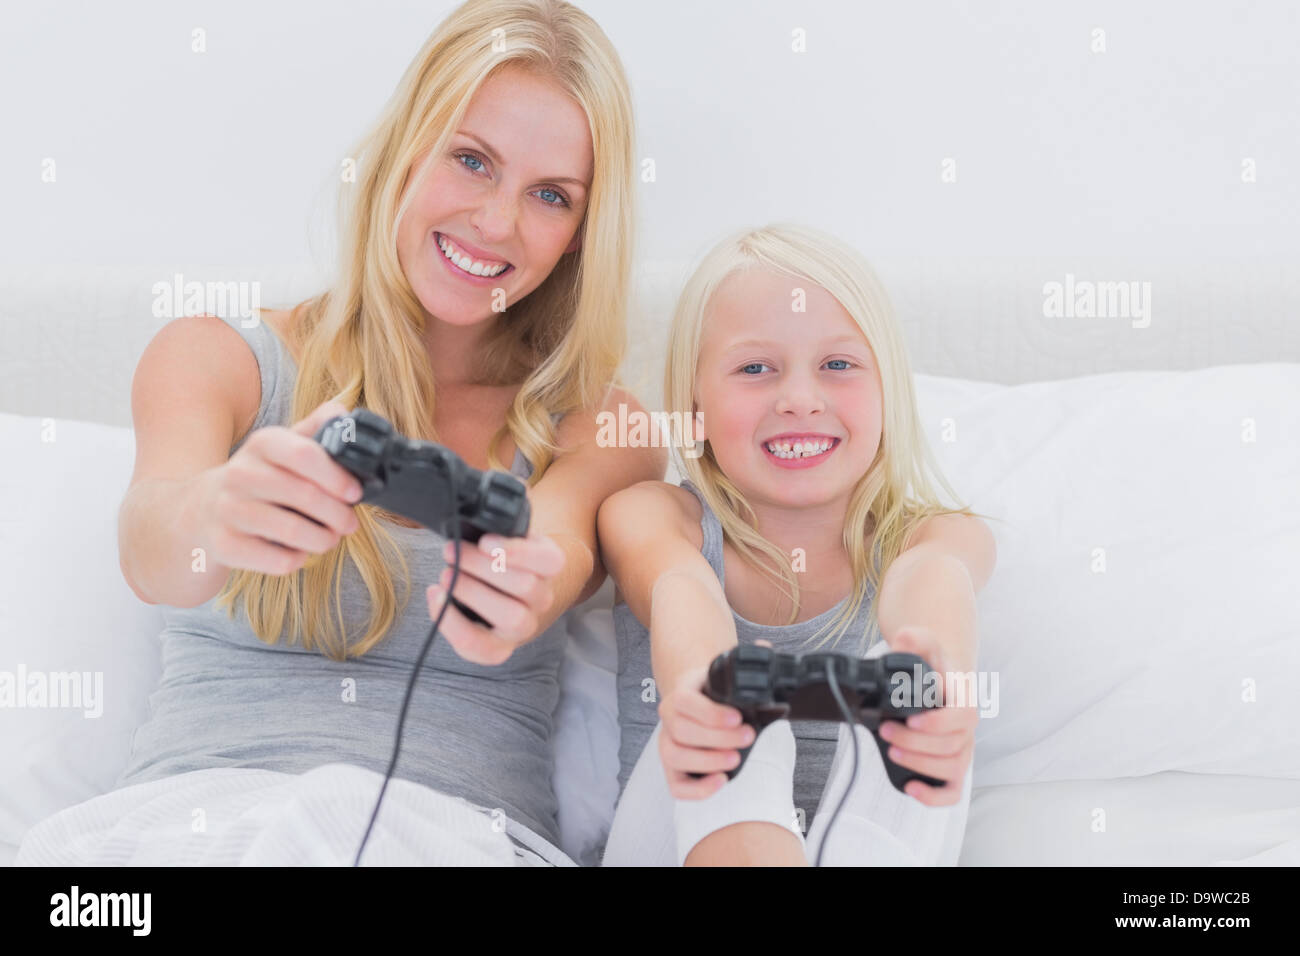 Mother and daughter playing video games Stock Photo